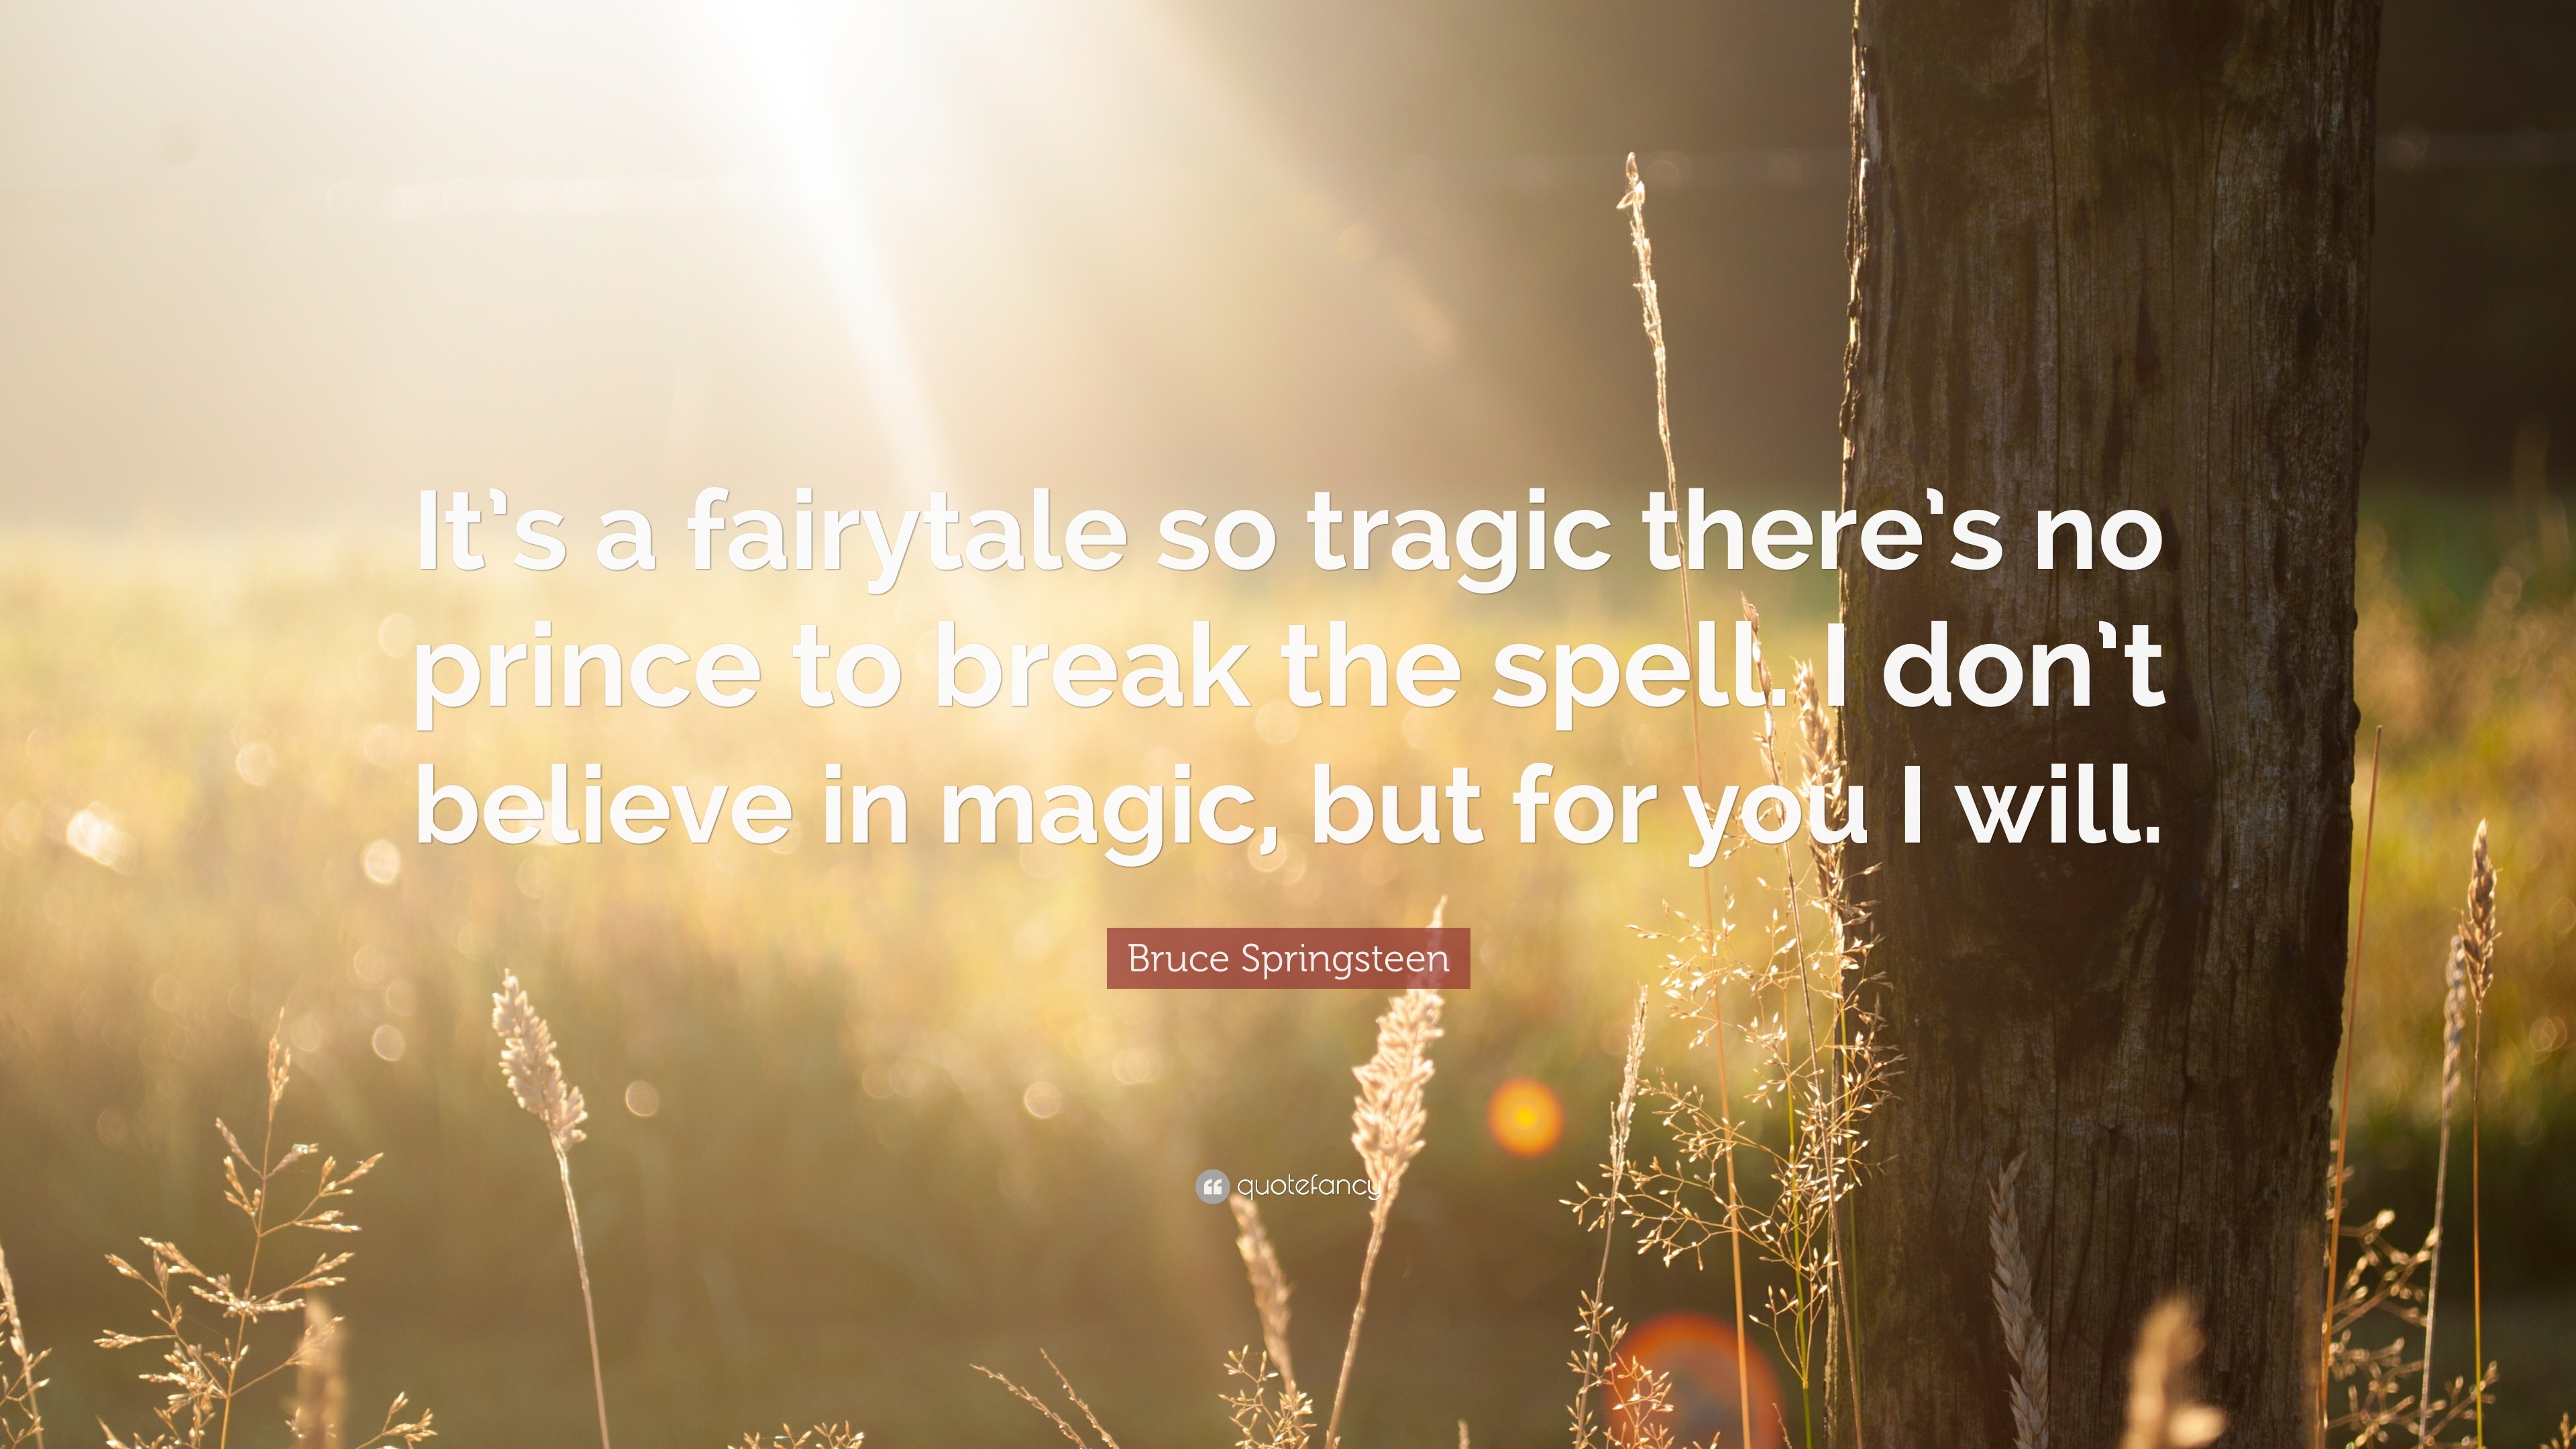 3840x2160 Bruce Springsteen Quote: “It's a fairytale so tragic there's no prince to  break the